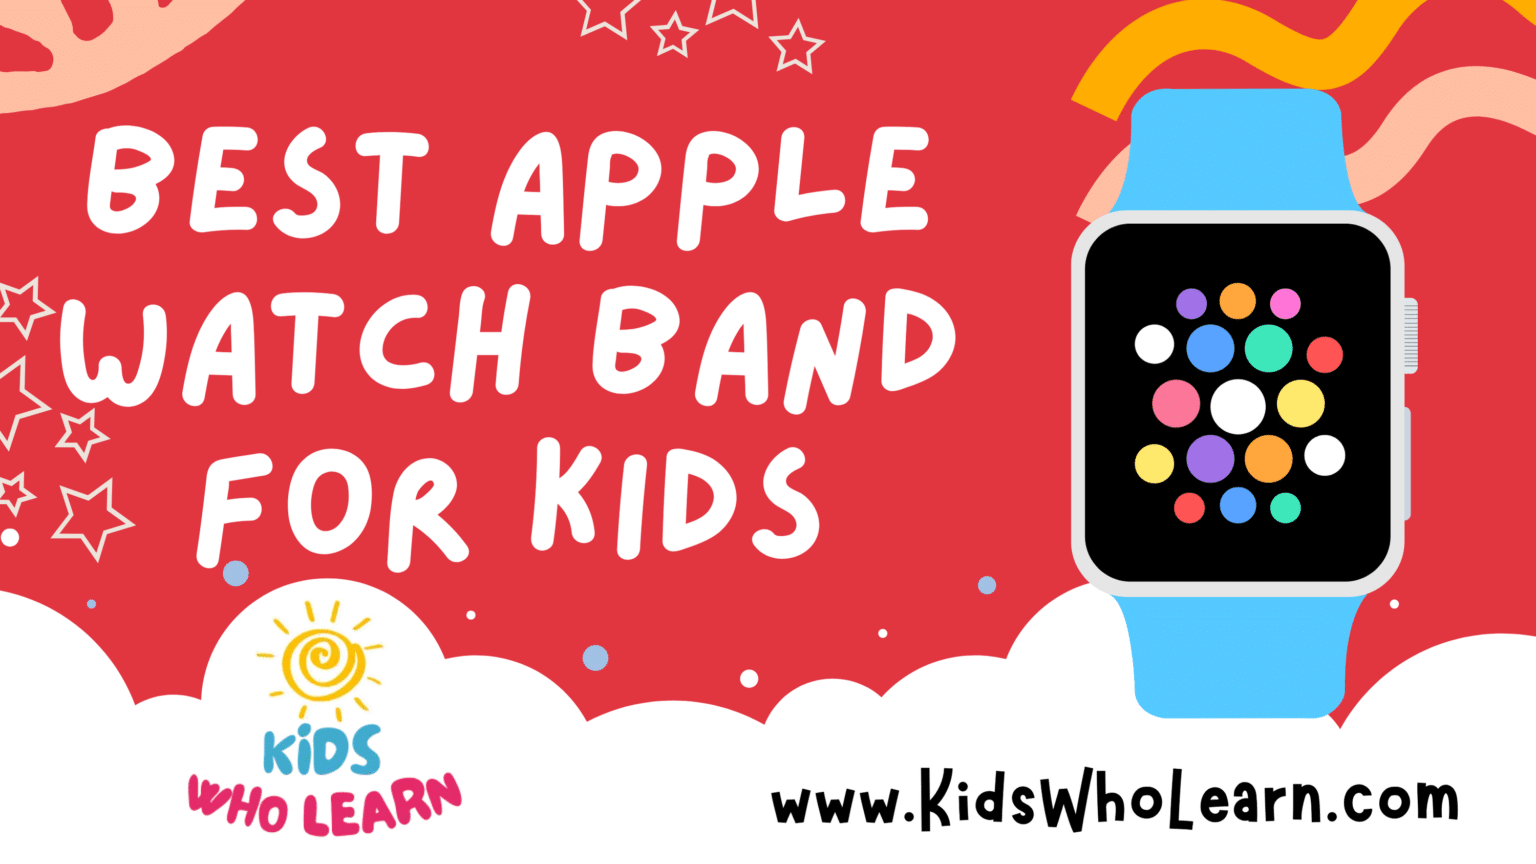 Best Apple Watch Band For Kids